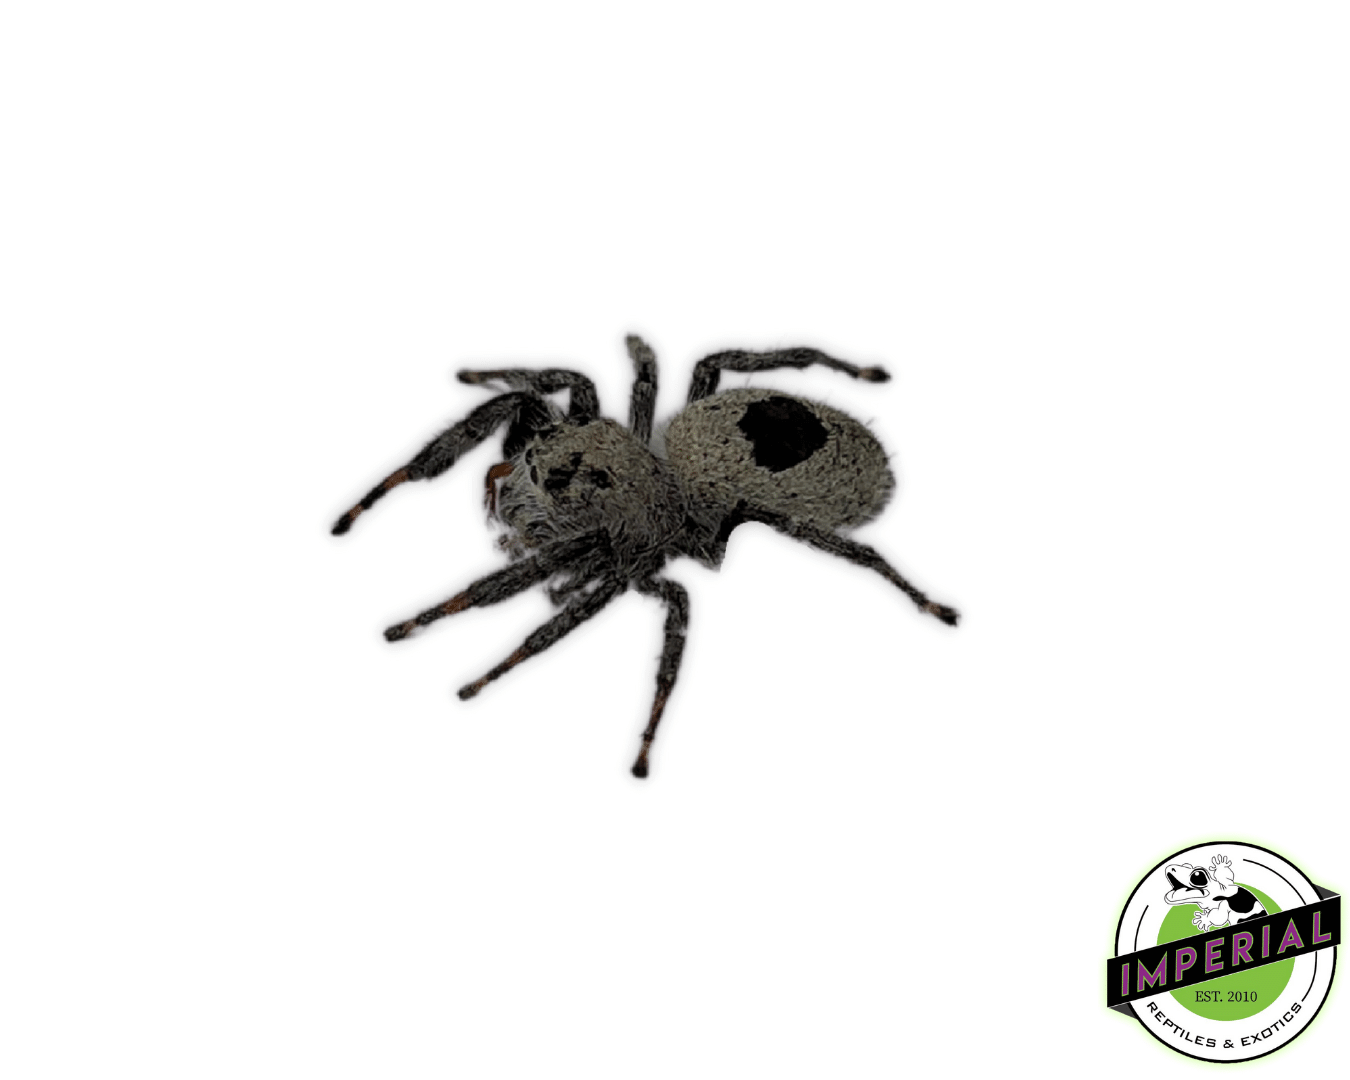 jumping spider for sale online, buy jumping spider near me at cheap prices